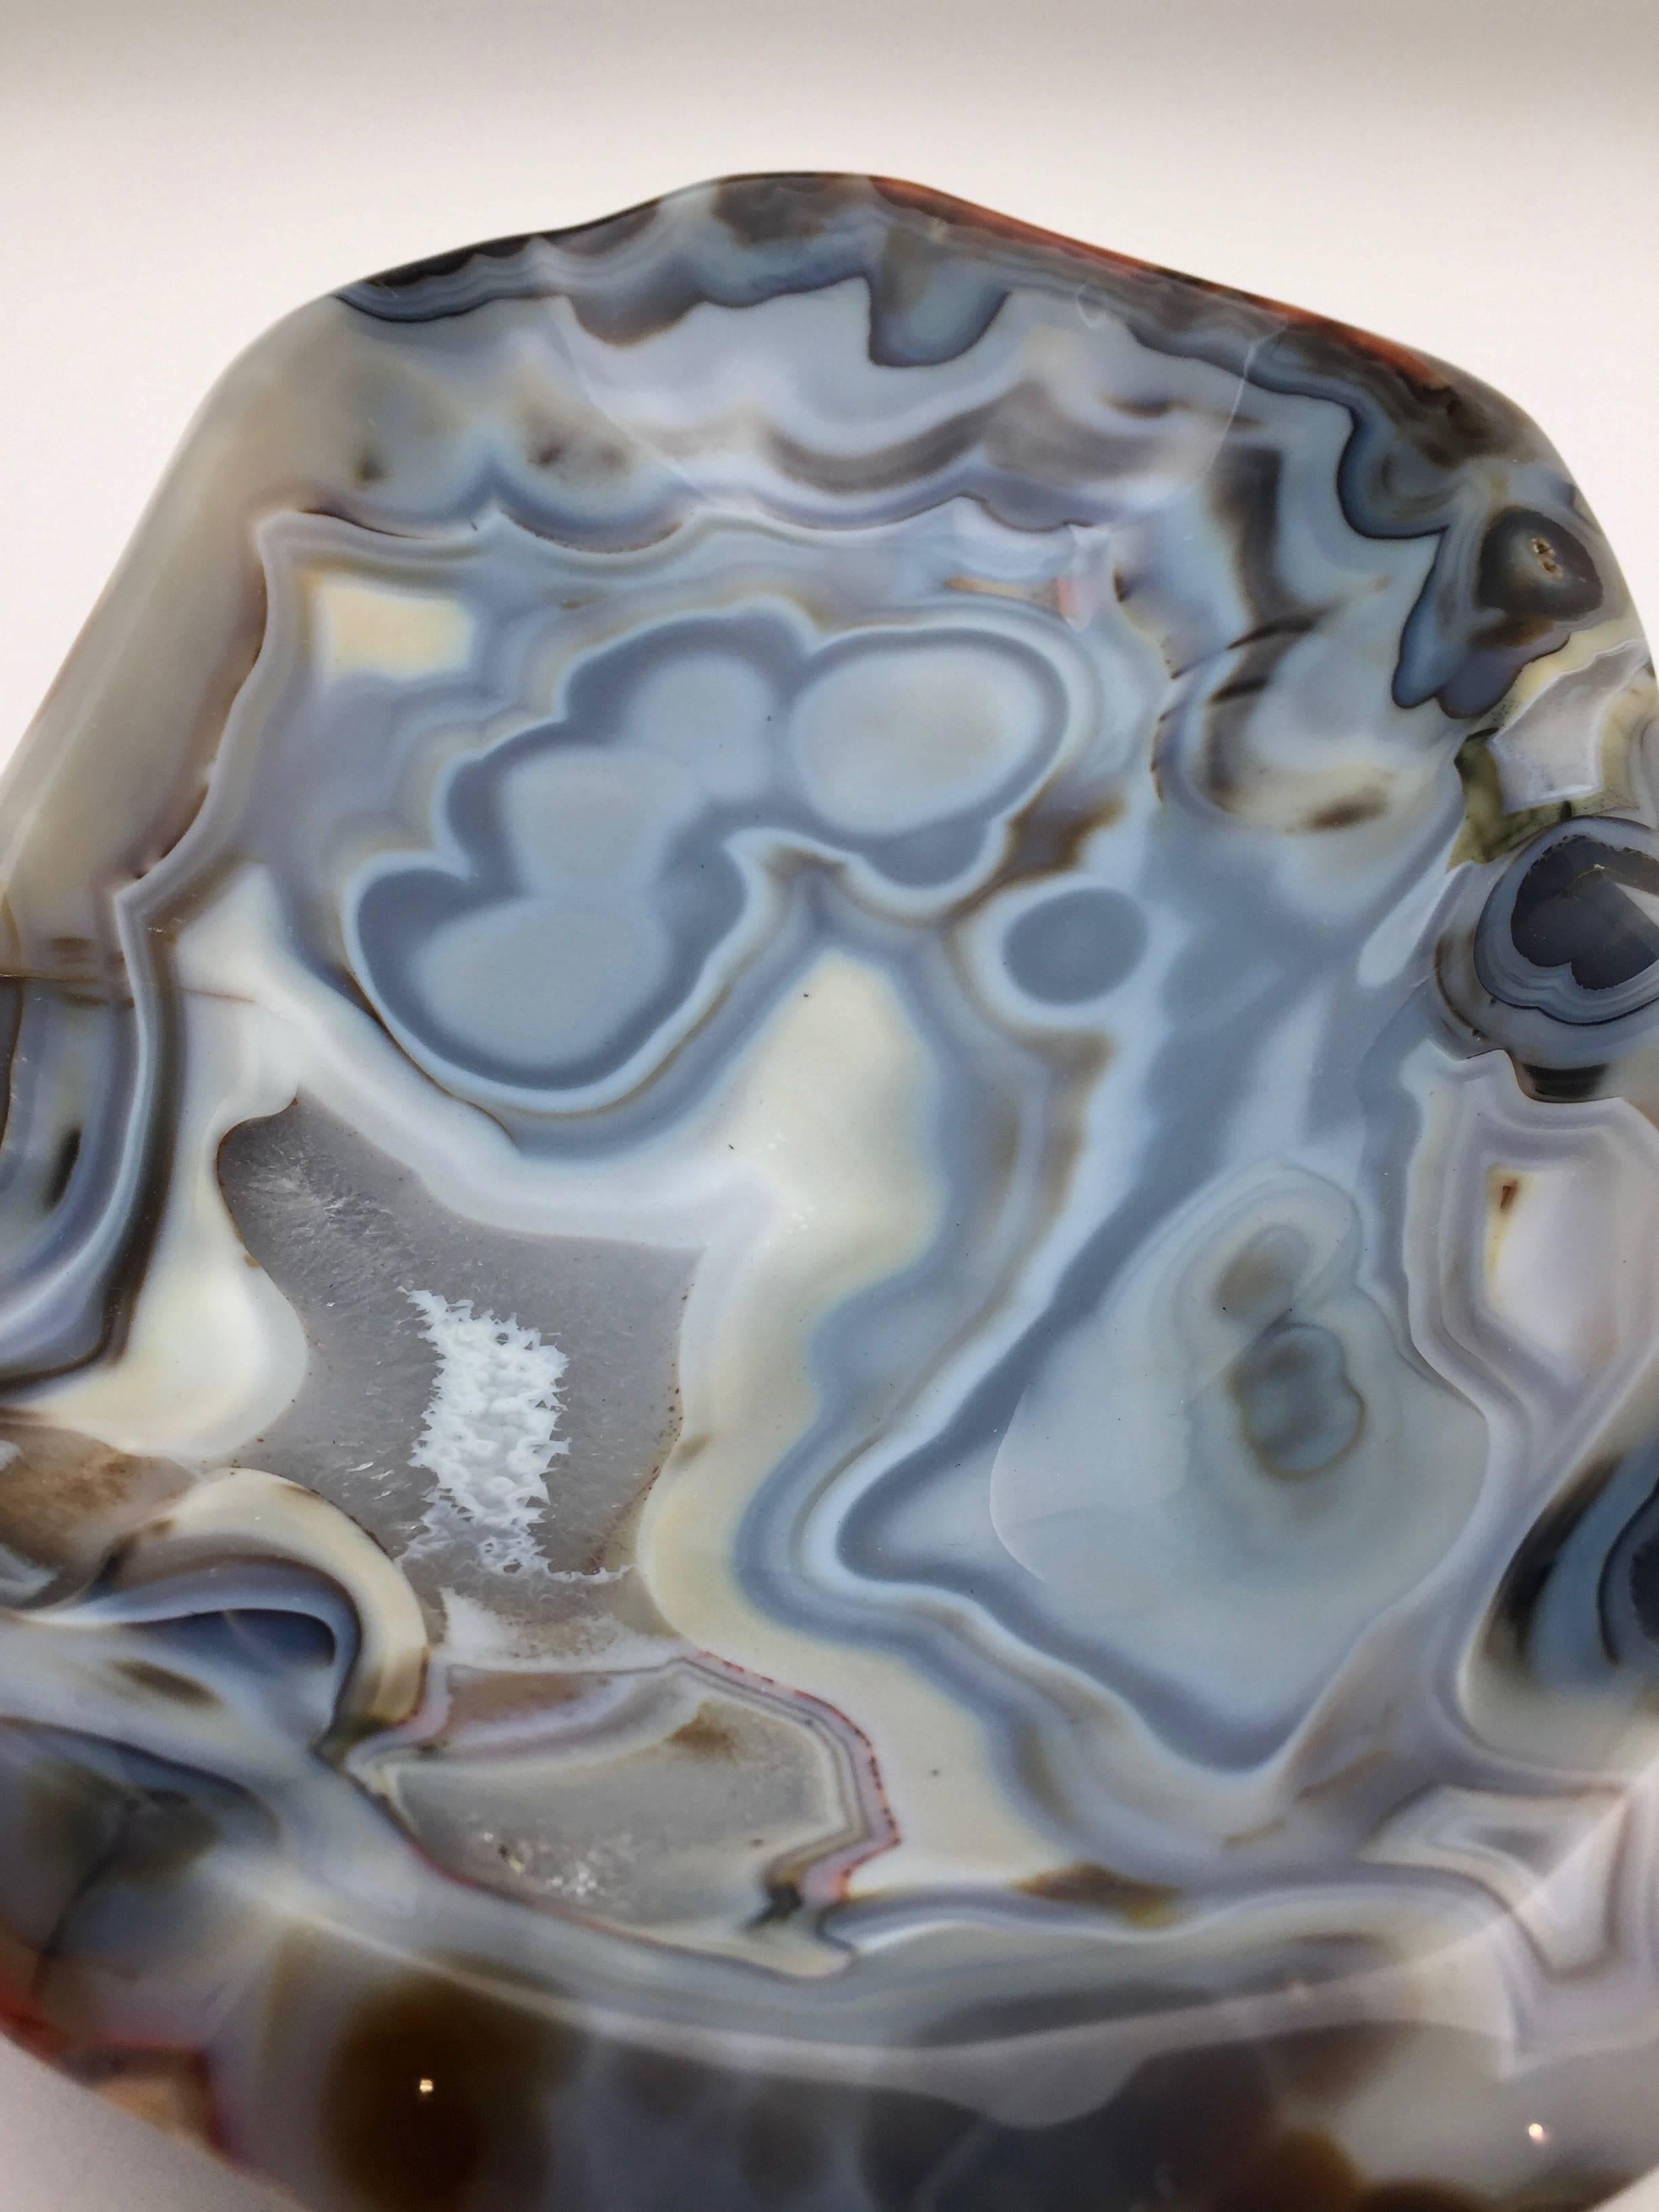 Malagasy Agate Vide Poche Bowl, Rare and Large in Size, Hand-Carved in Madagascar